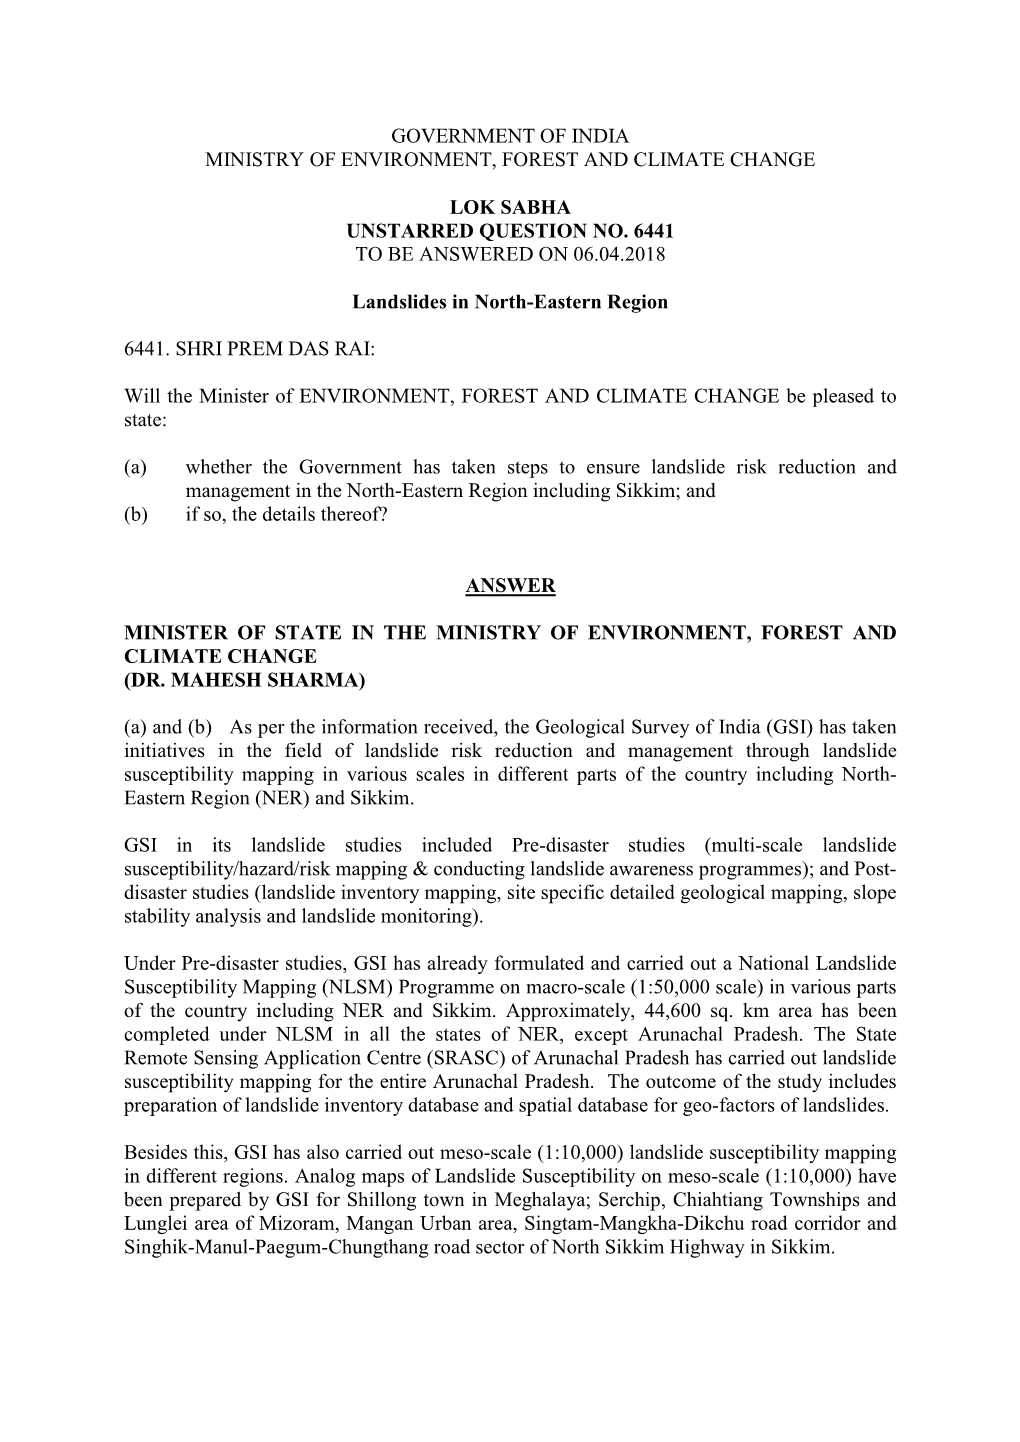 Government of India Ministry of Environment, Forest and Climate Change Lok Sabha Unstarred Question No. 6441 to Be Answered on 0